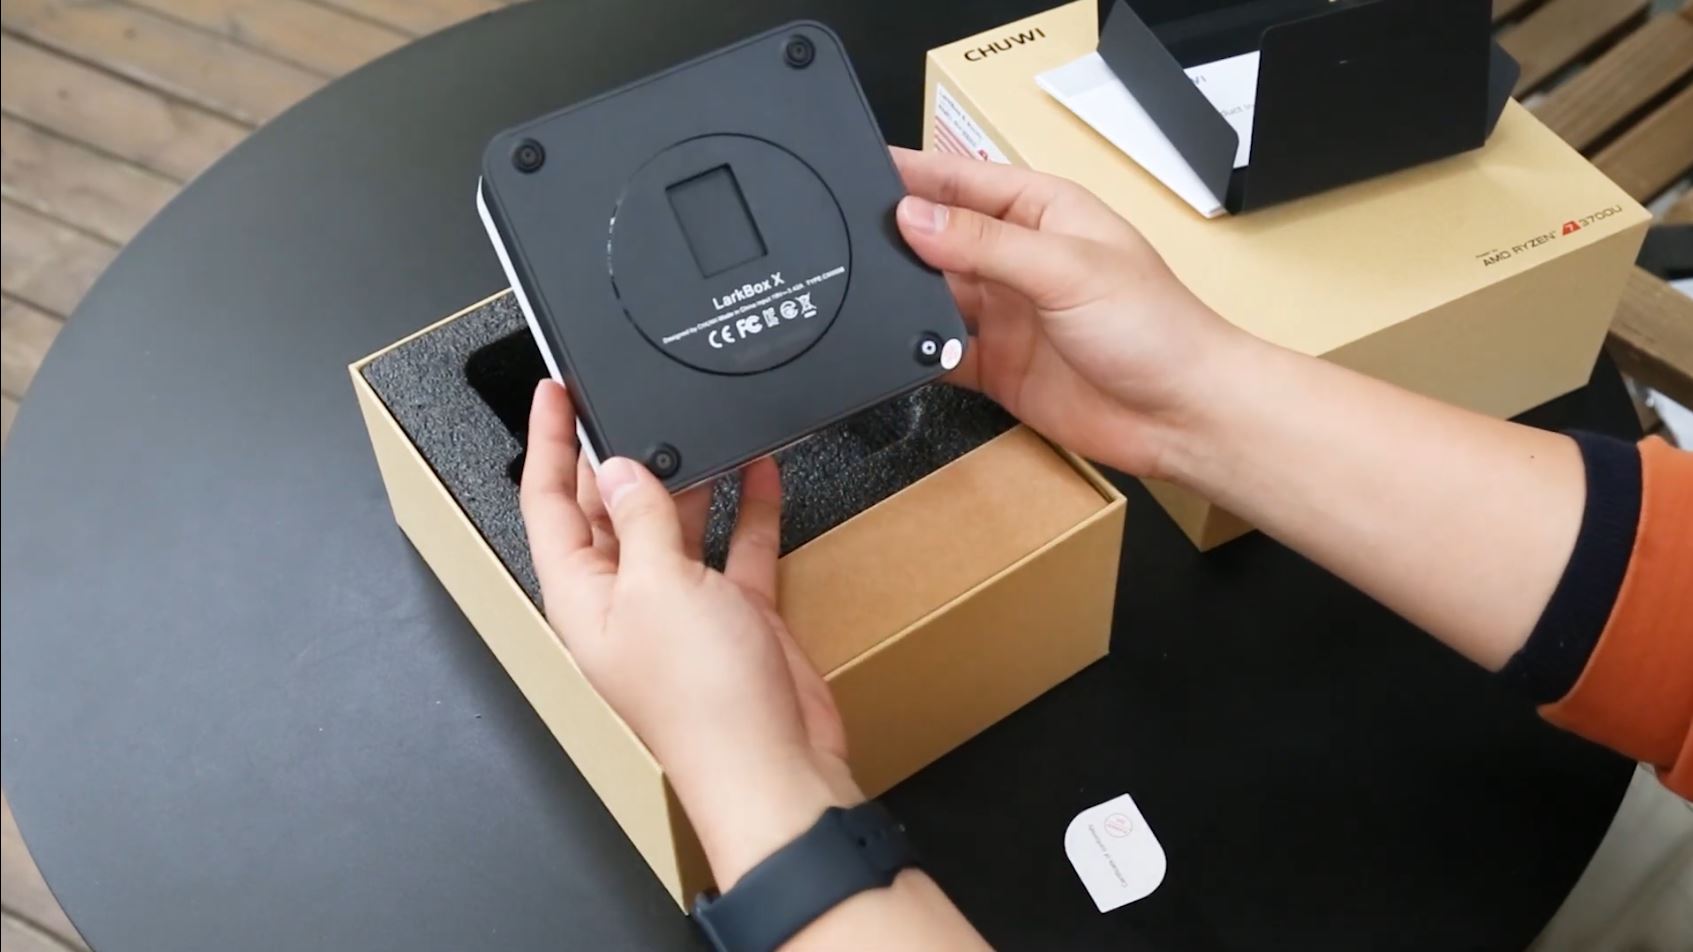 Say Goodbye to Clutter with the Space-Saving LarkBox X Mini PC